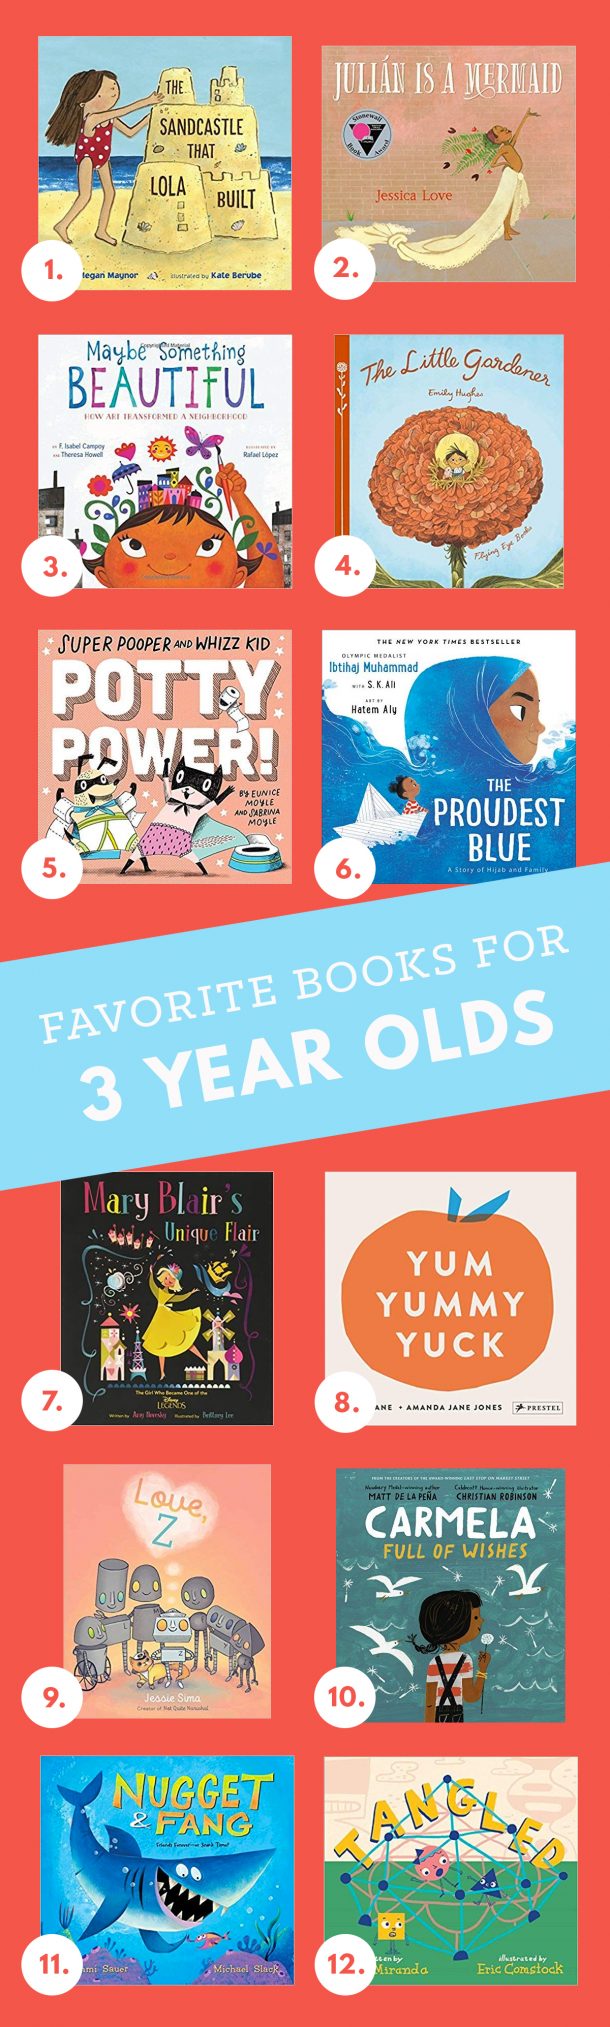 Our Favorite Books For Three Year Olds Studio DIY